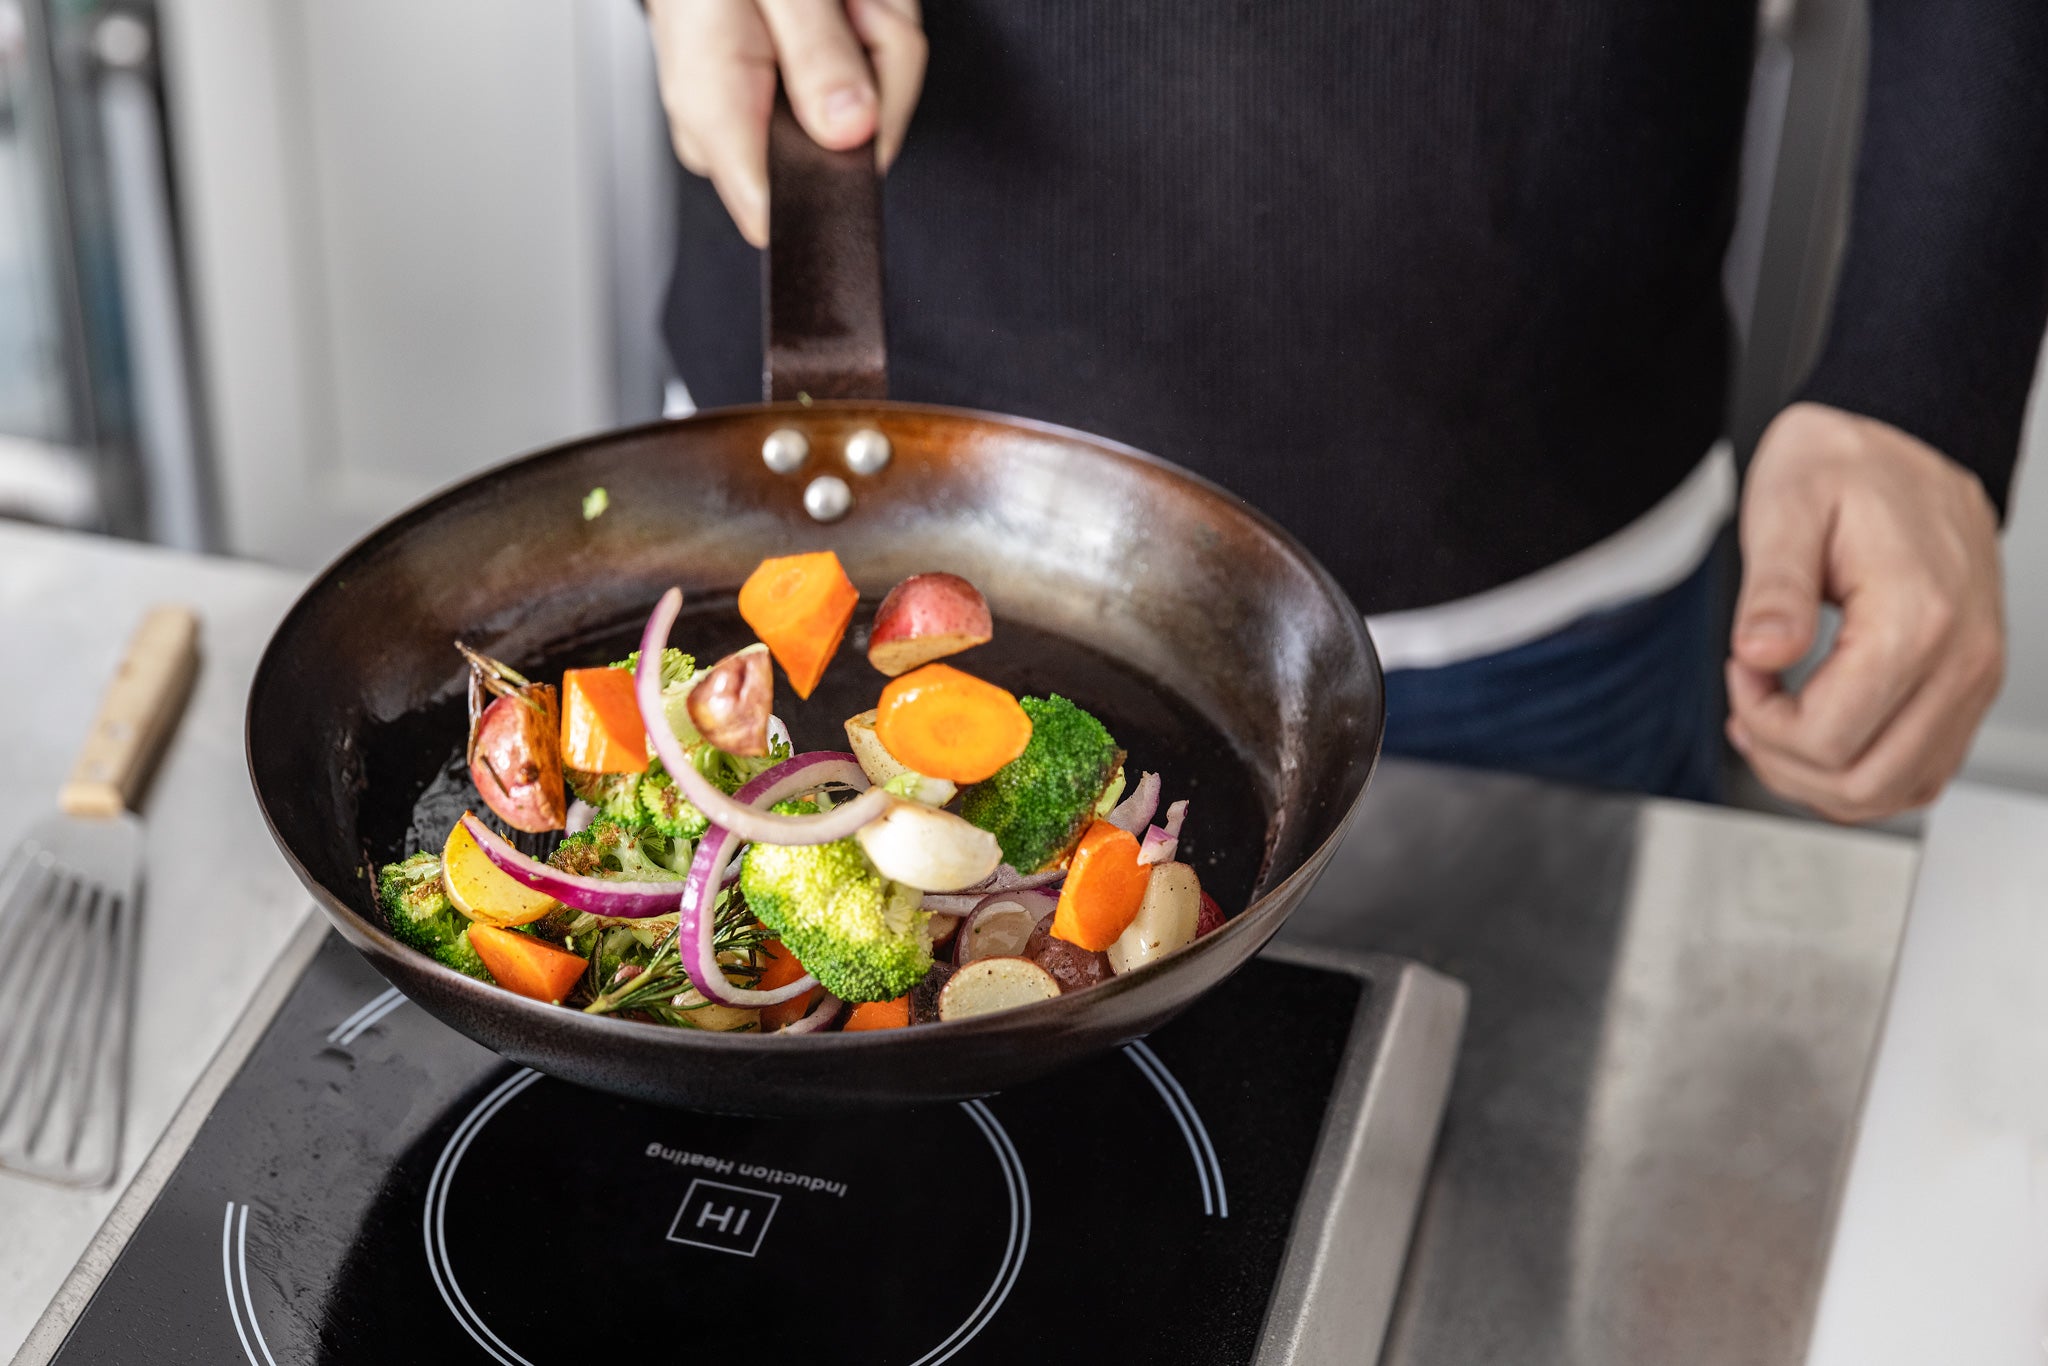 How To Clean Your Stainless Steel Cookware – Sardel